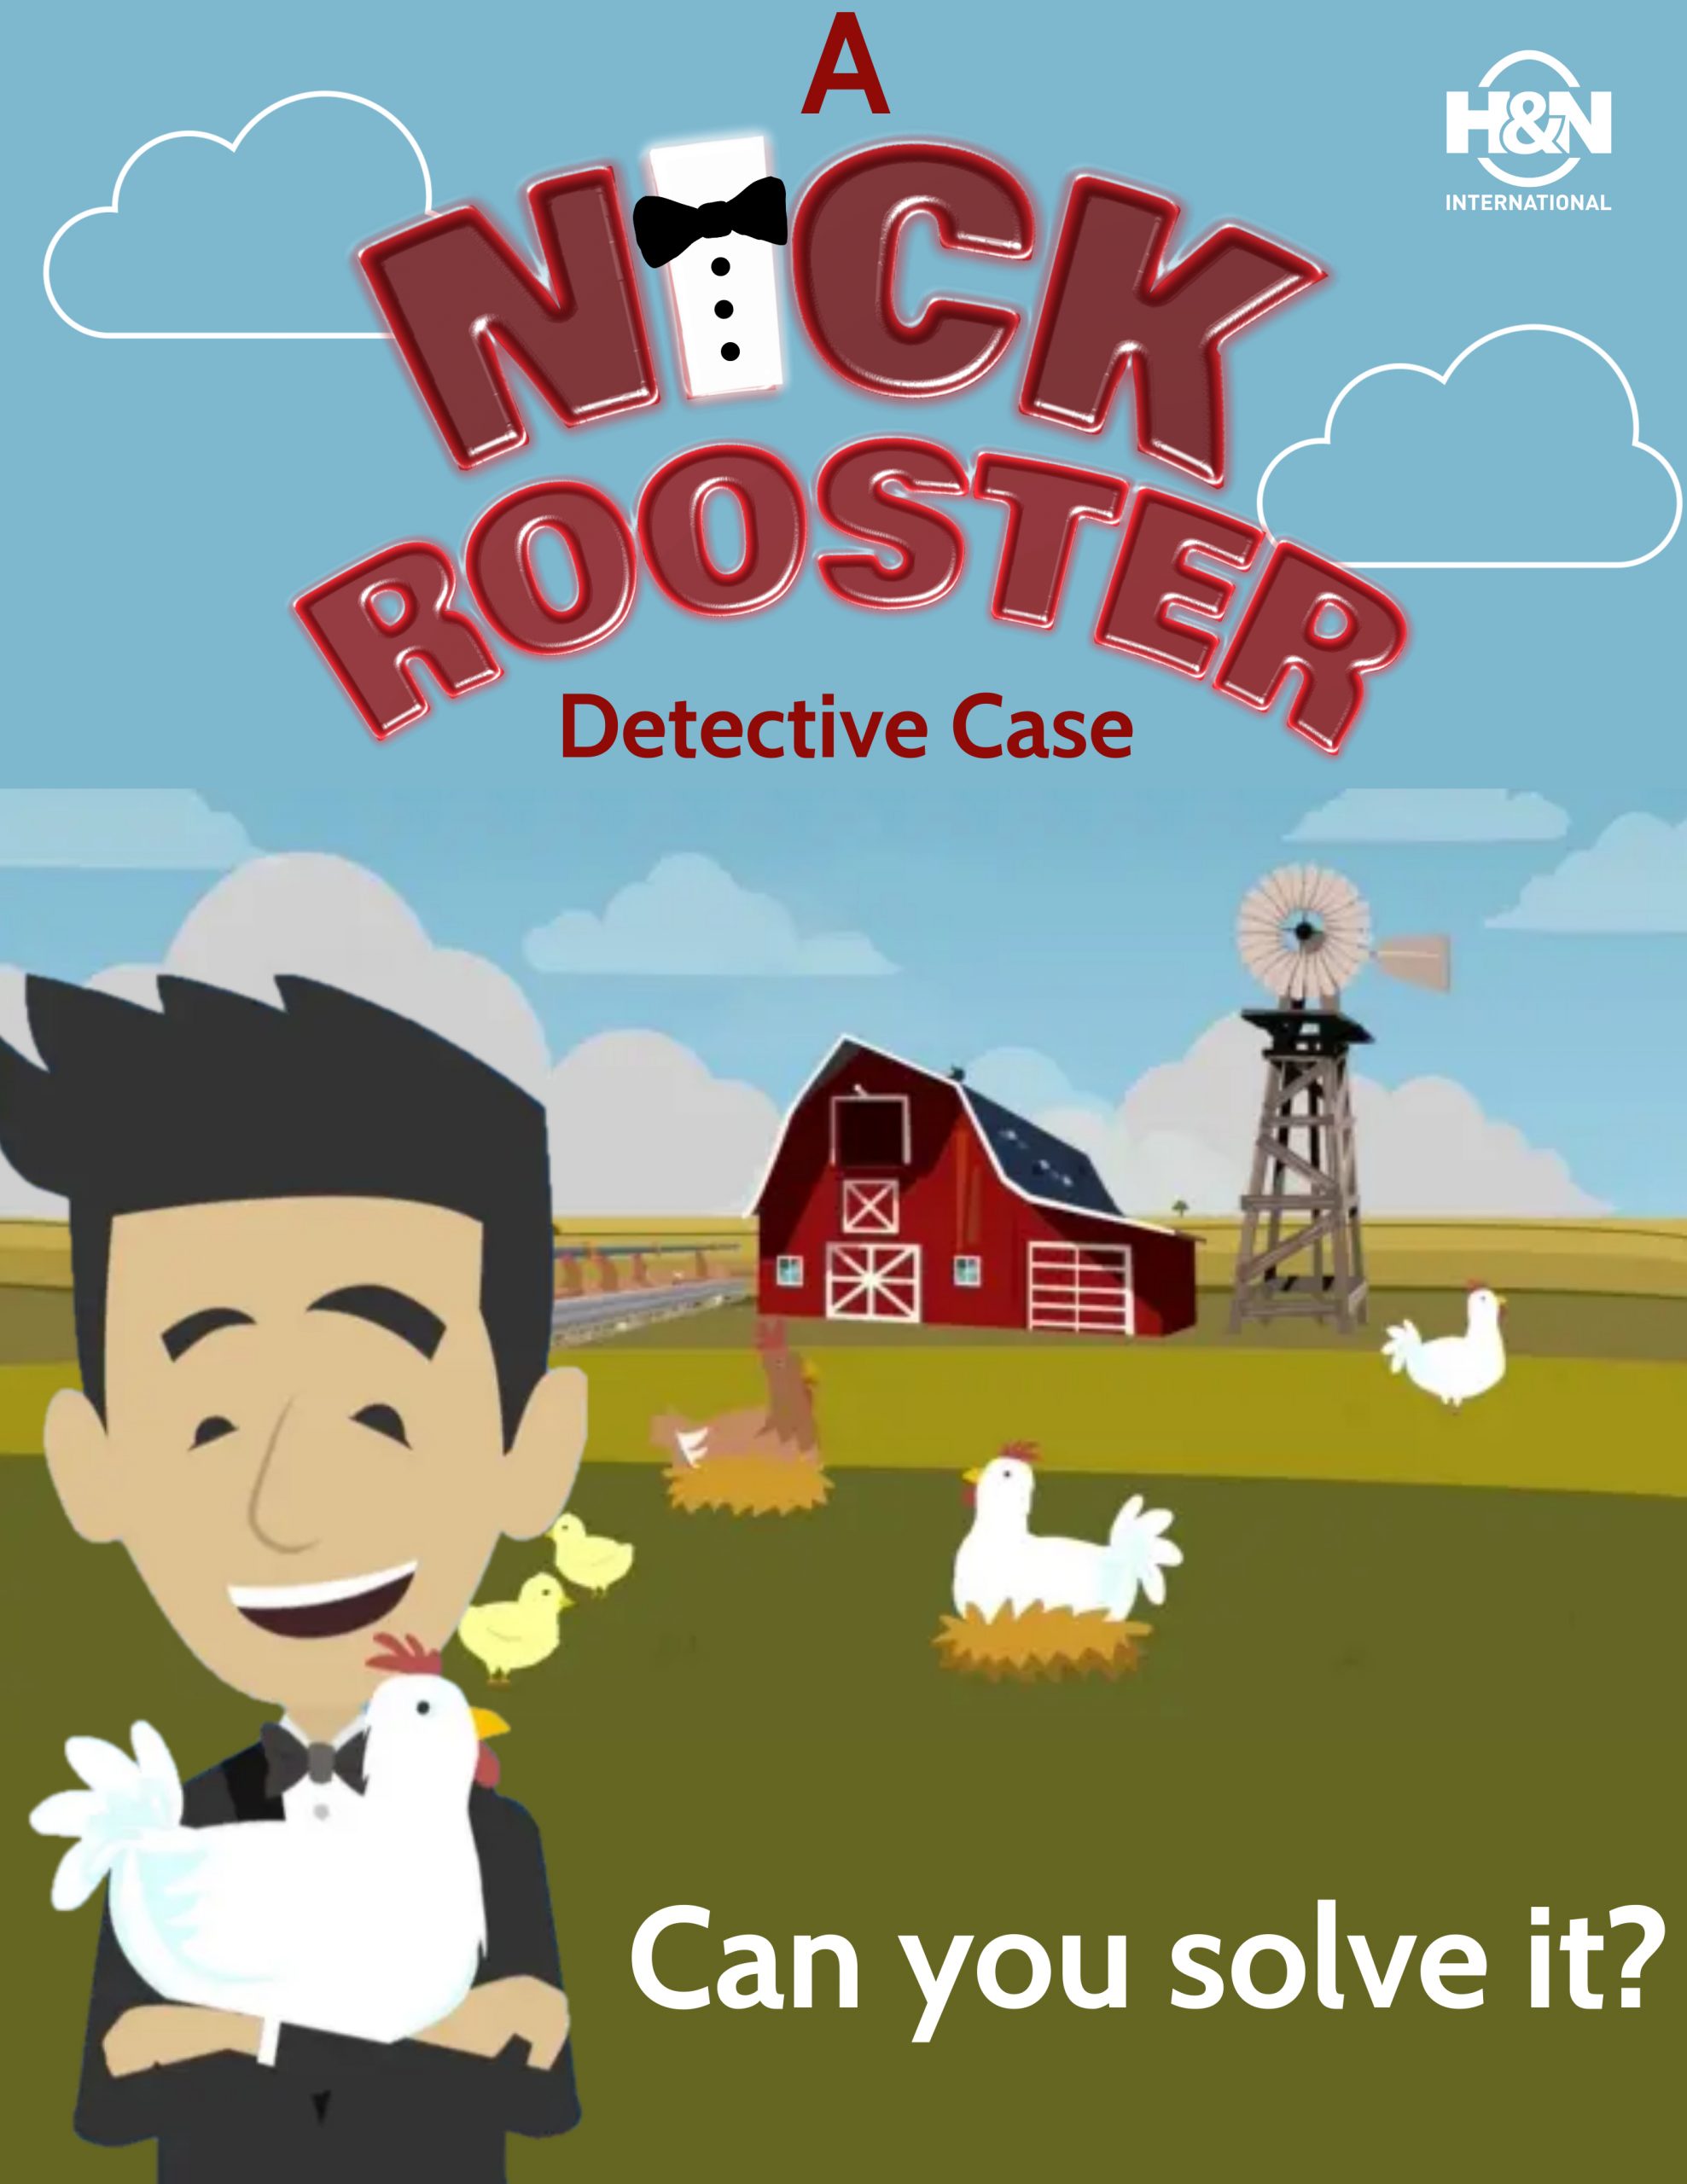 Nick Rooster case no. 1